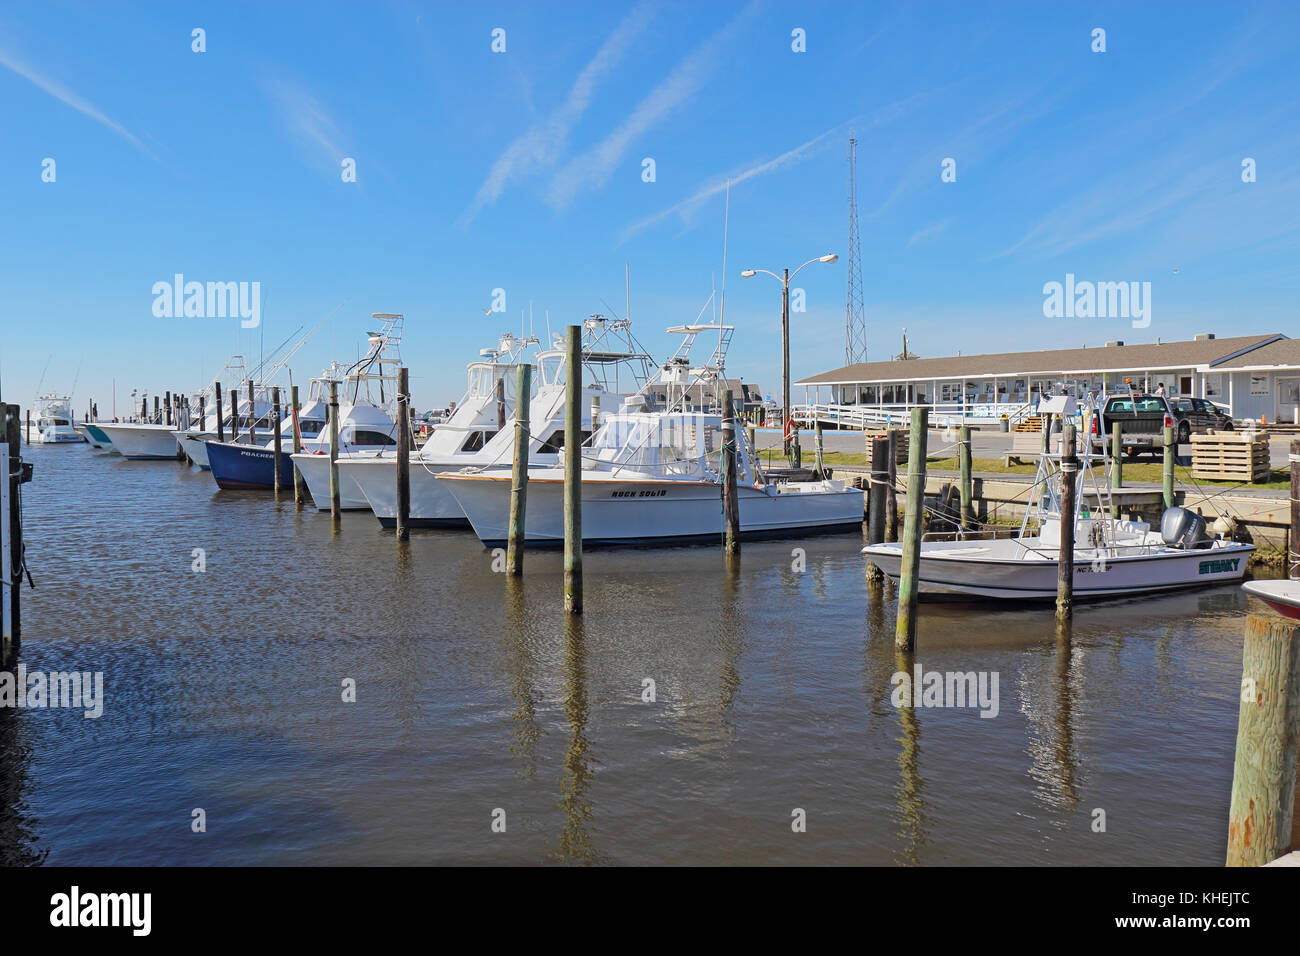 NAGS HEAD, NORTH CAROLINA - FEBRUARY 20 2017: Charter fishing boats and store for excursions into the waters of Pamlico Sound and the Atlantic Ocean a Stock Photo